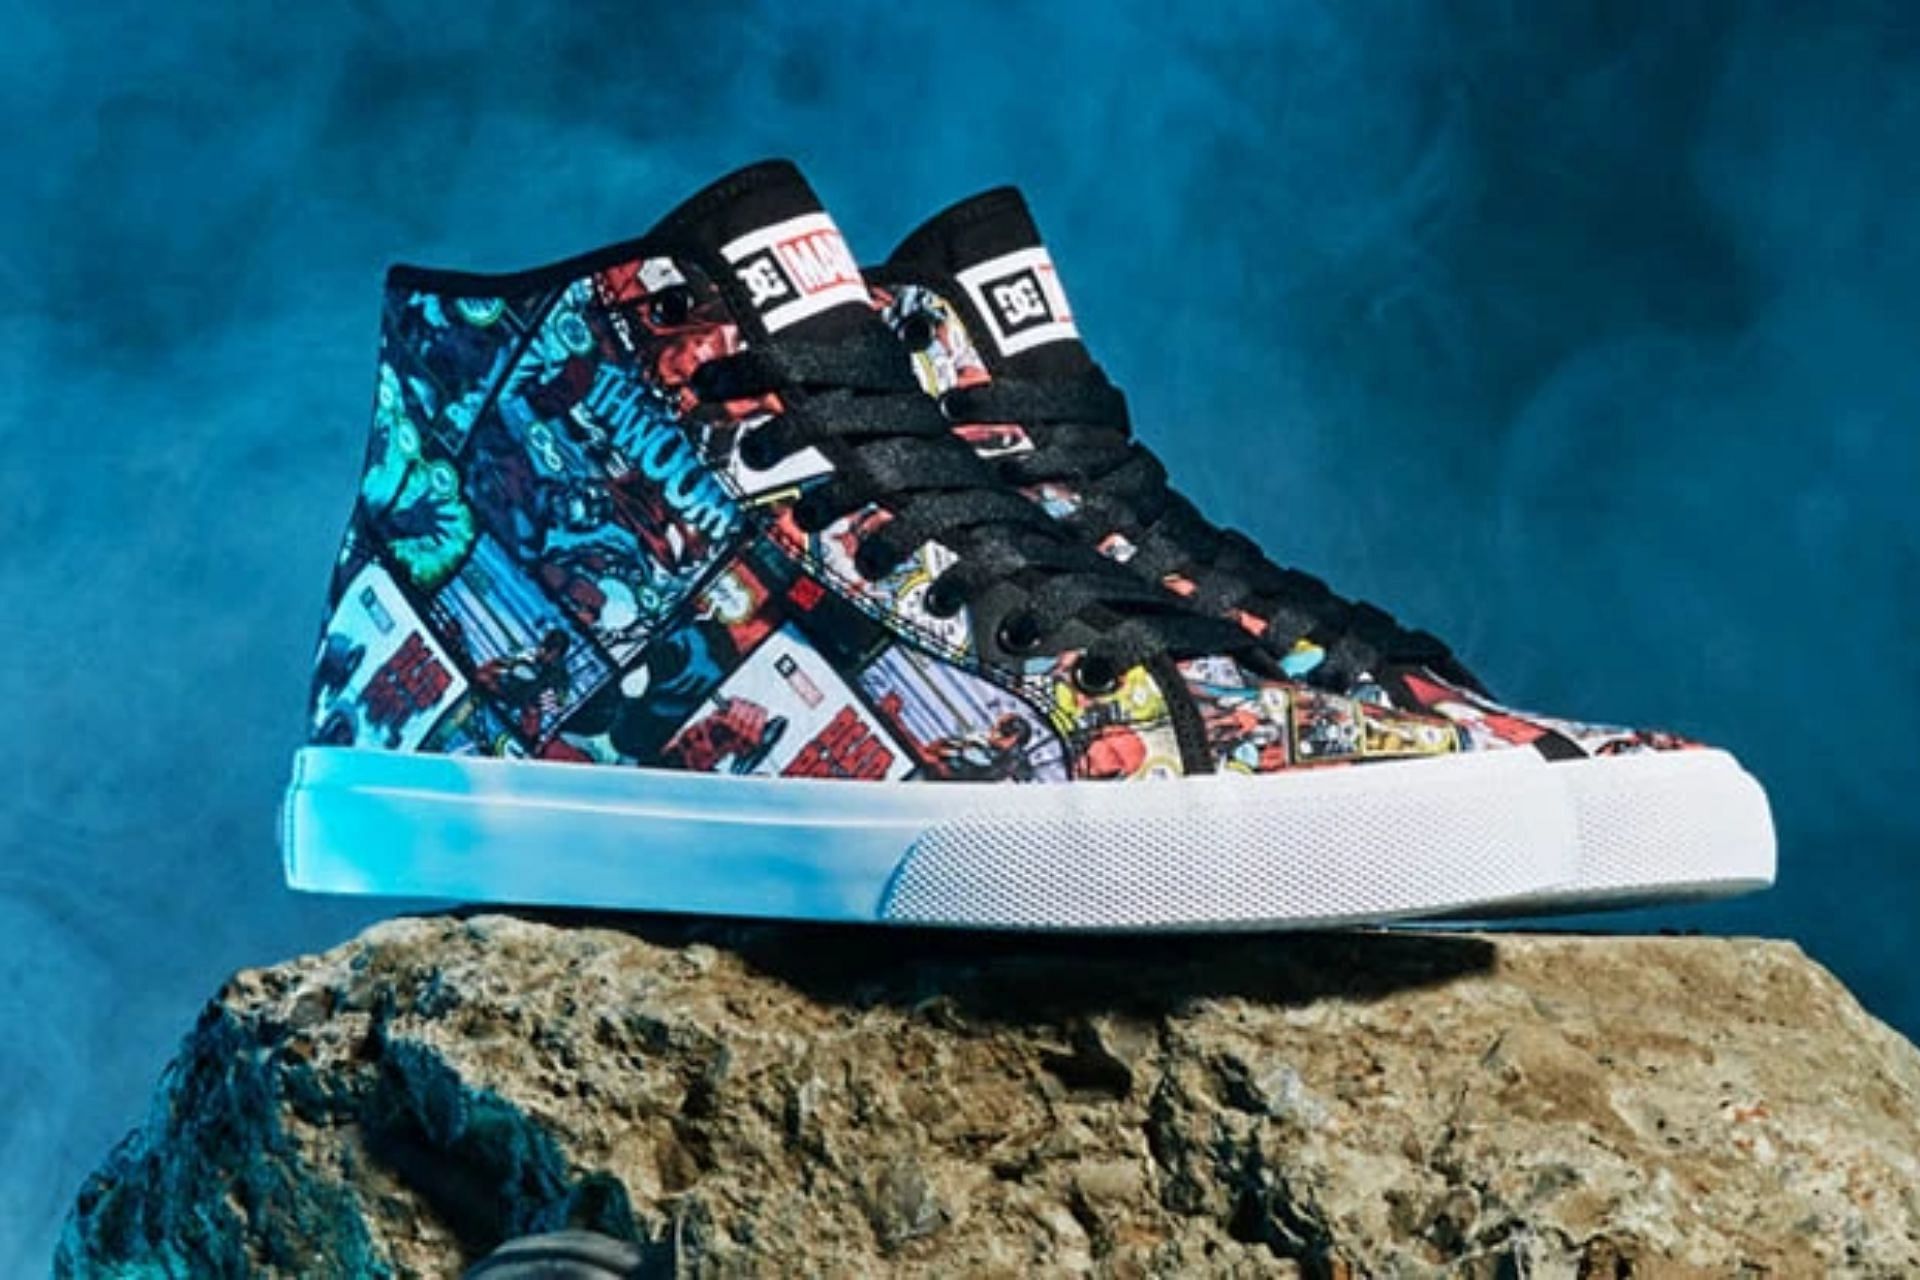 DC Shoes x Marvel Deadpool Collection - The Kickz Stand